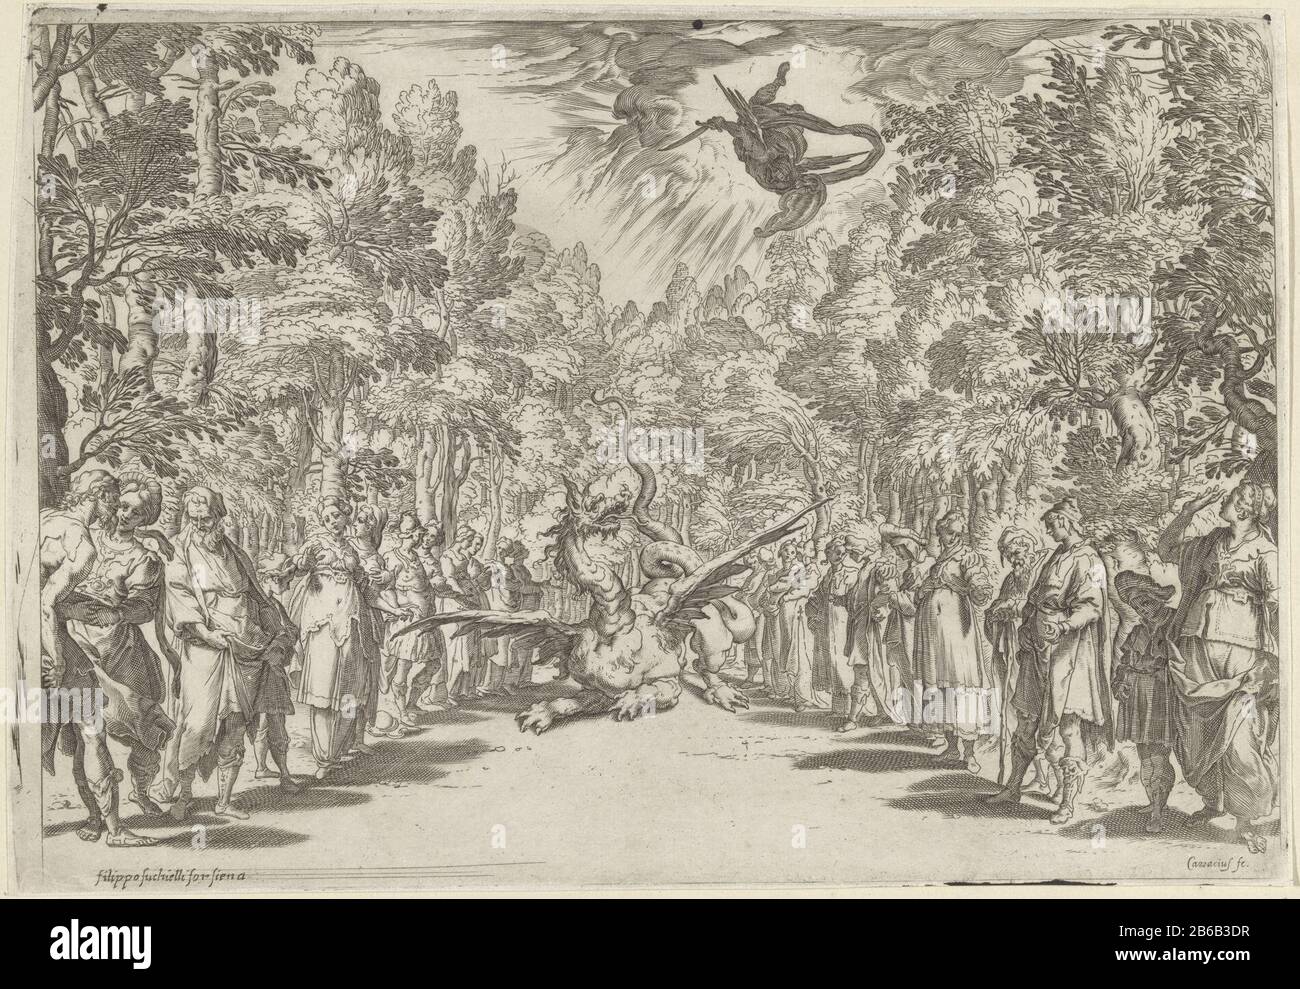 An Apollo the python Display of third interlude during the performance of the play 'La Pellegrina' by Girolamo Bargagli Apollo slaying python for a group of spectators in a forest. For the six intermezzi Giovanni Bardi machines and costumes were designed by Bernardo Buontalenti. This version was the occasion of the marriage of Ferdinando I de 'Medici and Christina of Lorraine in 1589. Manufacturer : printmaker: Agostino Carracci (listed property) to drawing: Andrea Boscolinaar design: Bernardo Buontalentiuitgever: Filippo Suchielli (listed object ) Place manufacture: print maker: Italy to draw Stock Photo